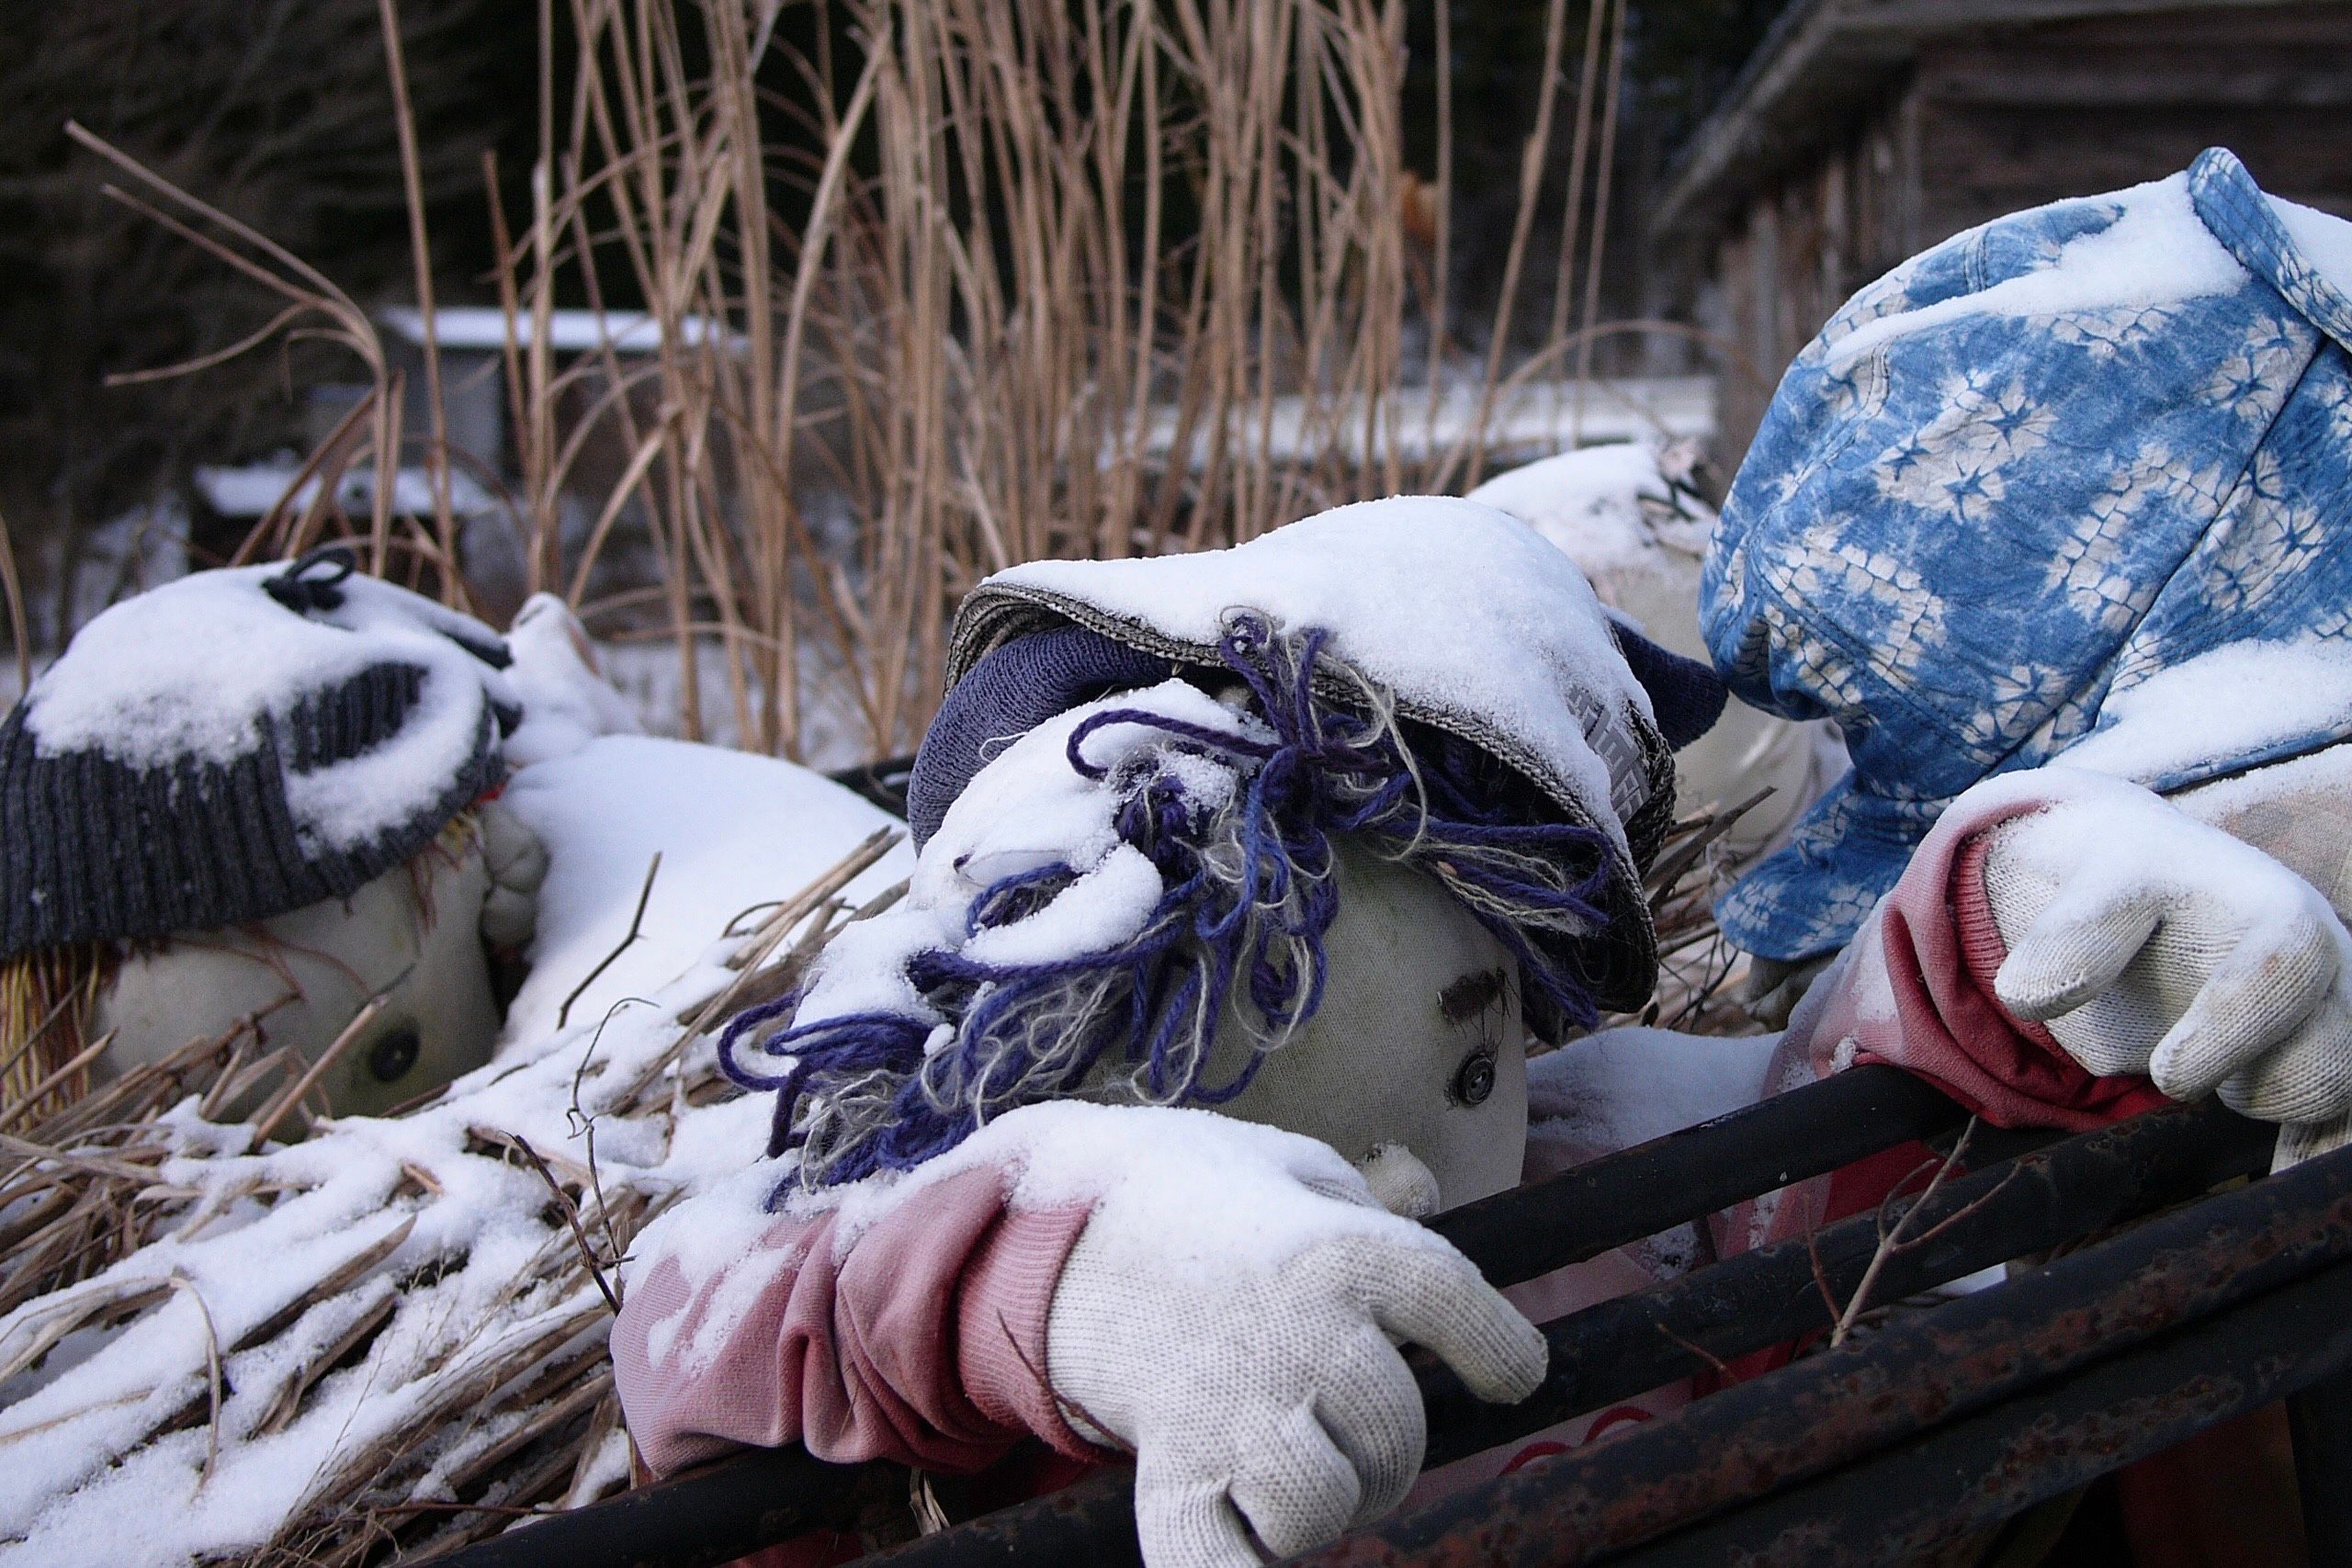 Doll children in a cart, covered in snow.